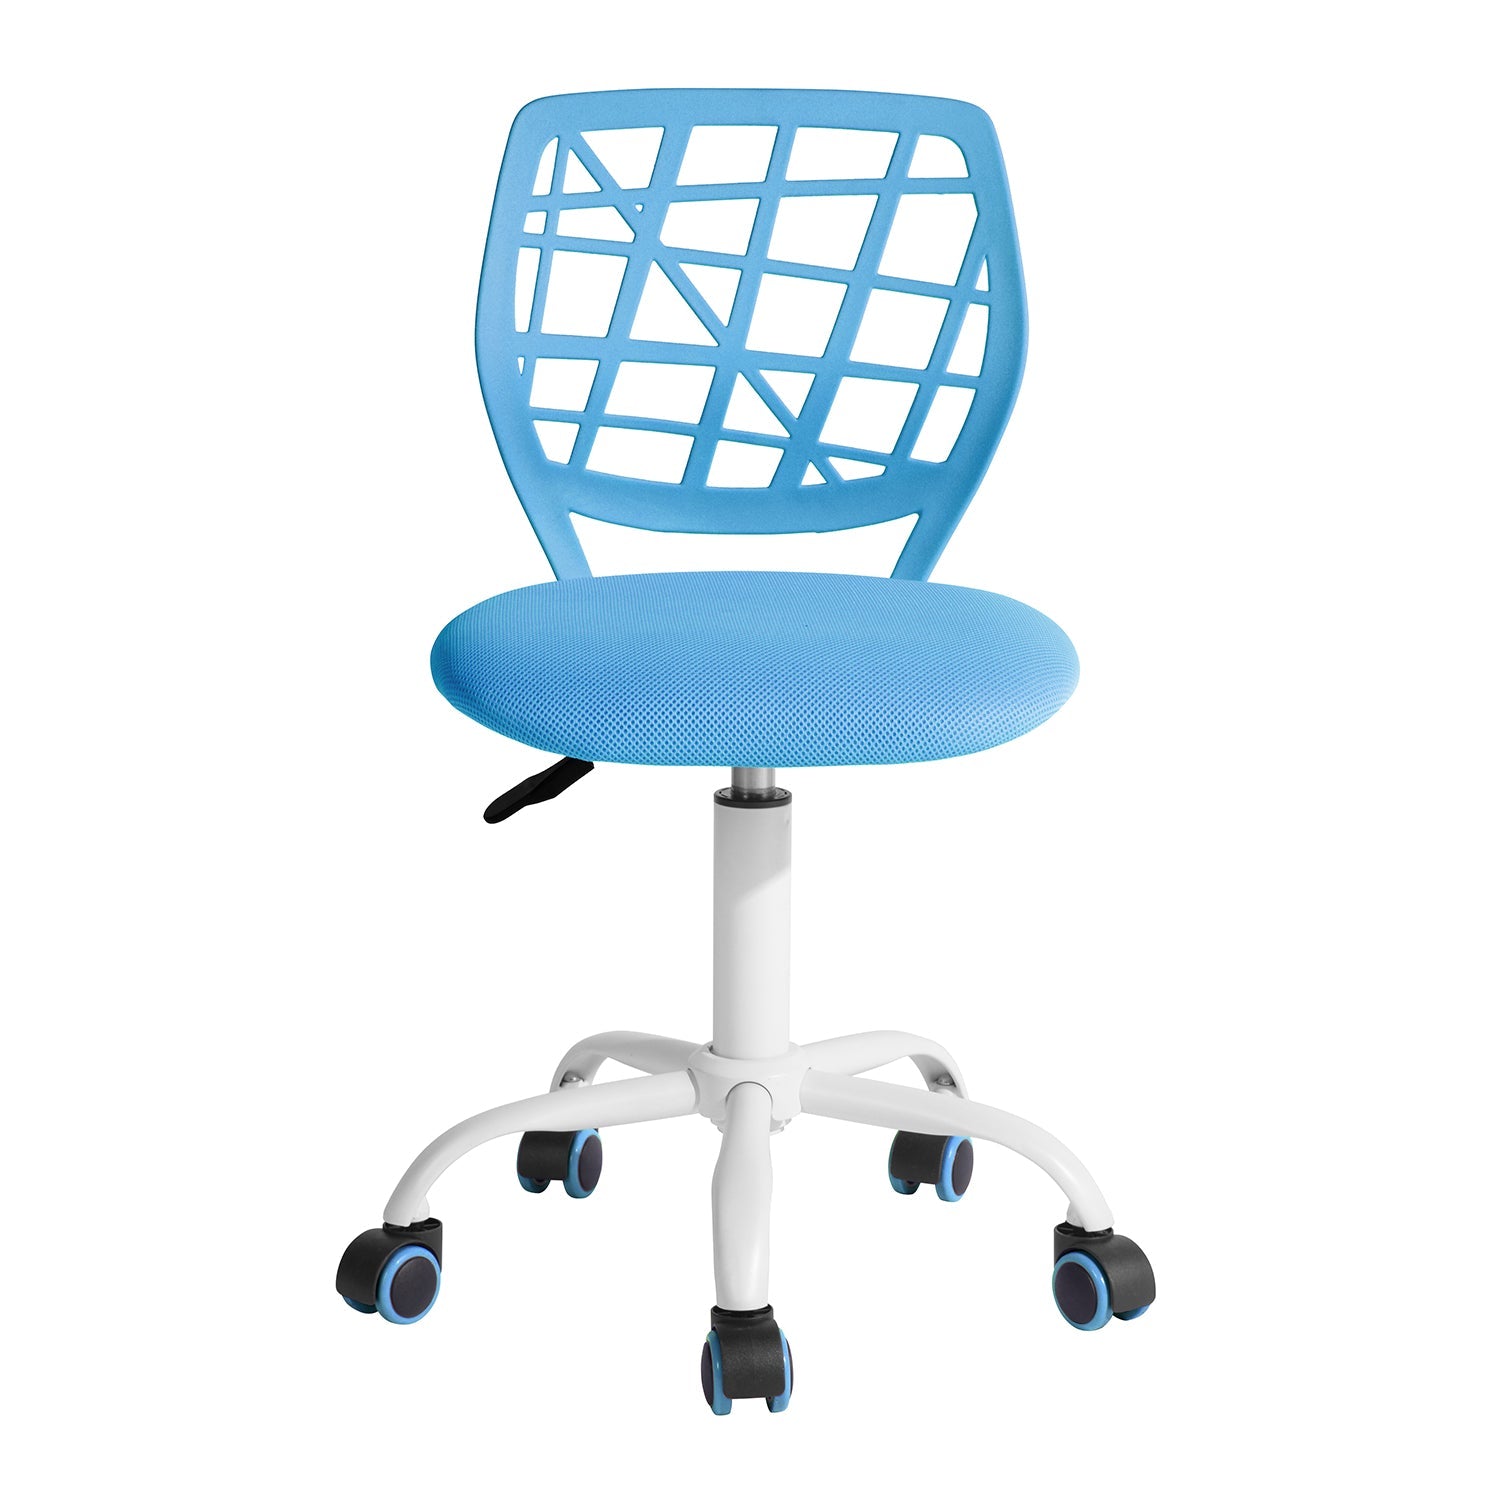 Carnation Blue Plica Office Chairs